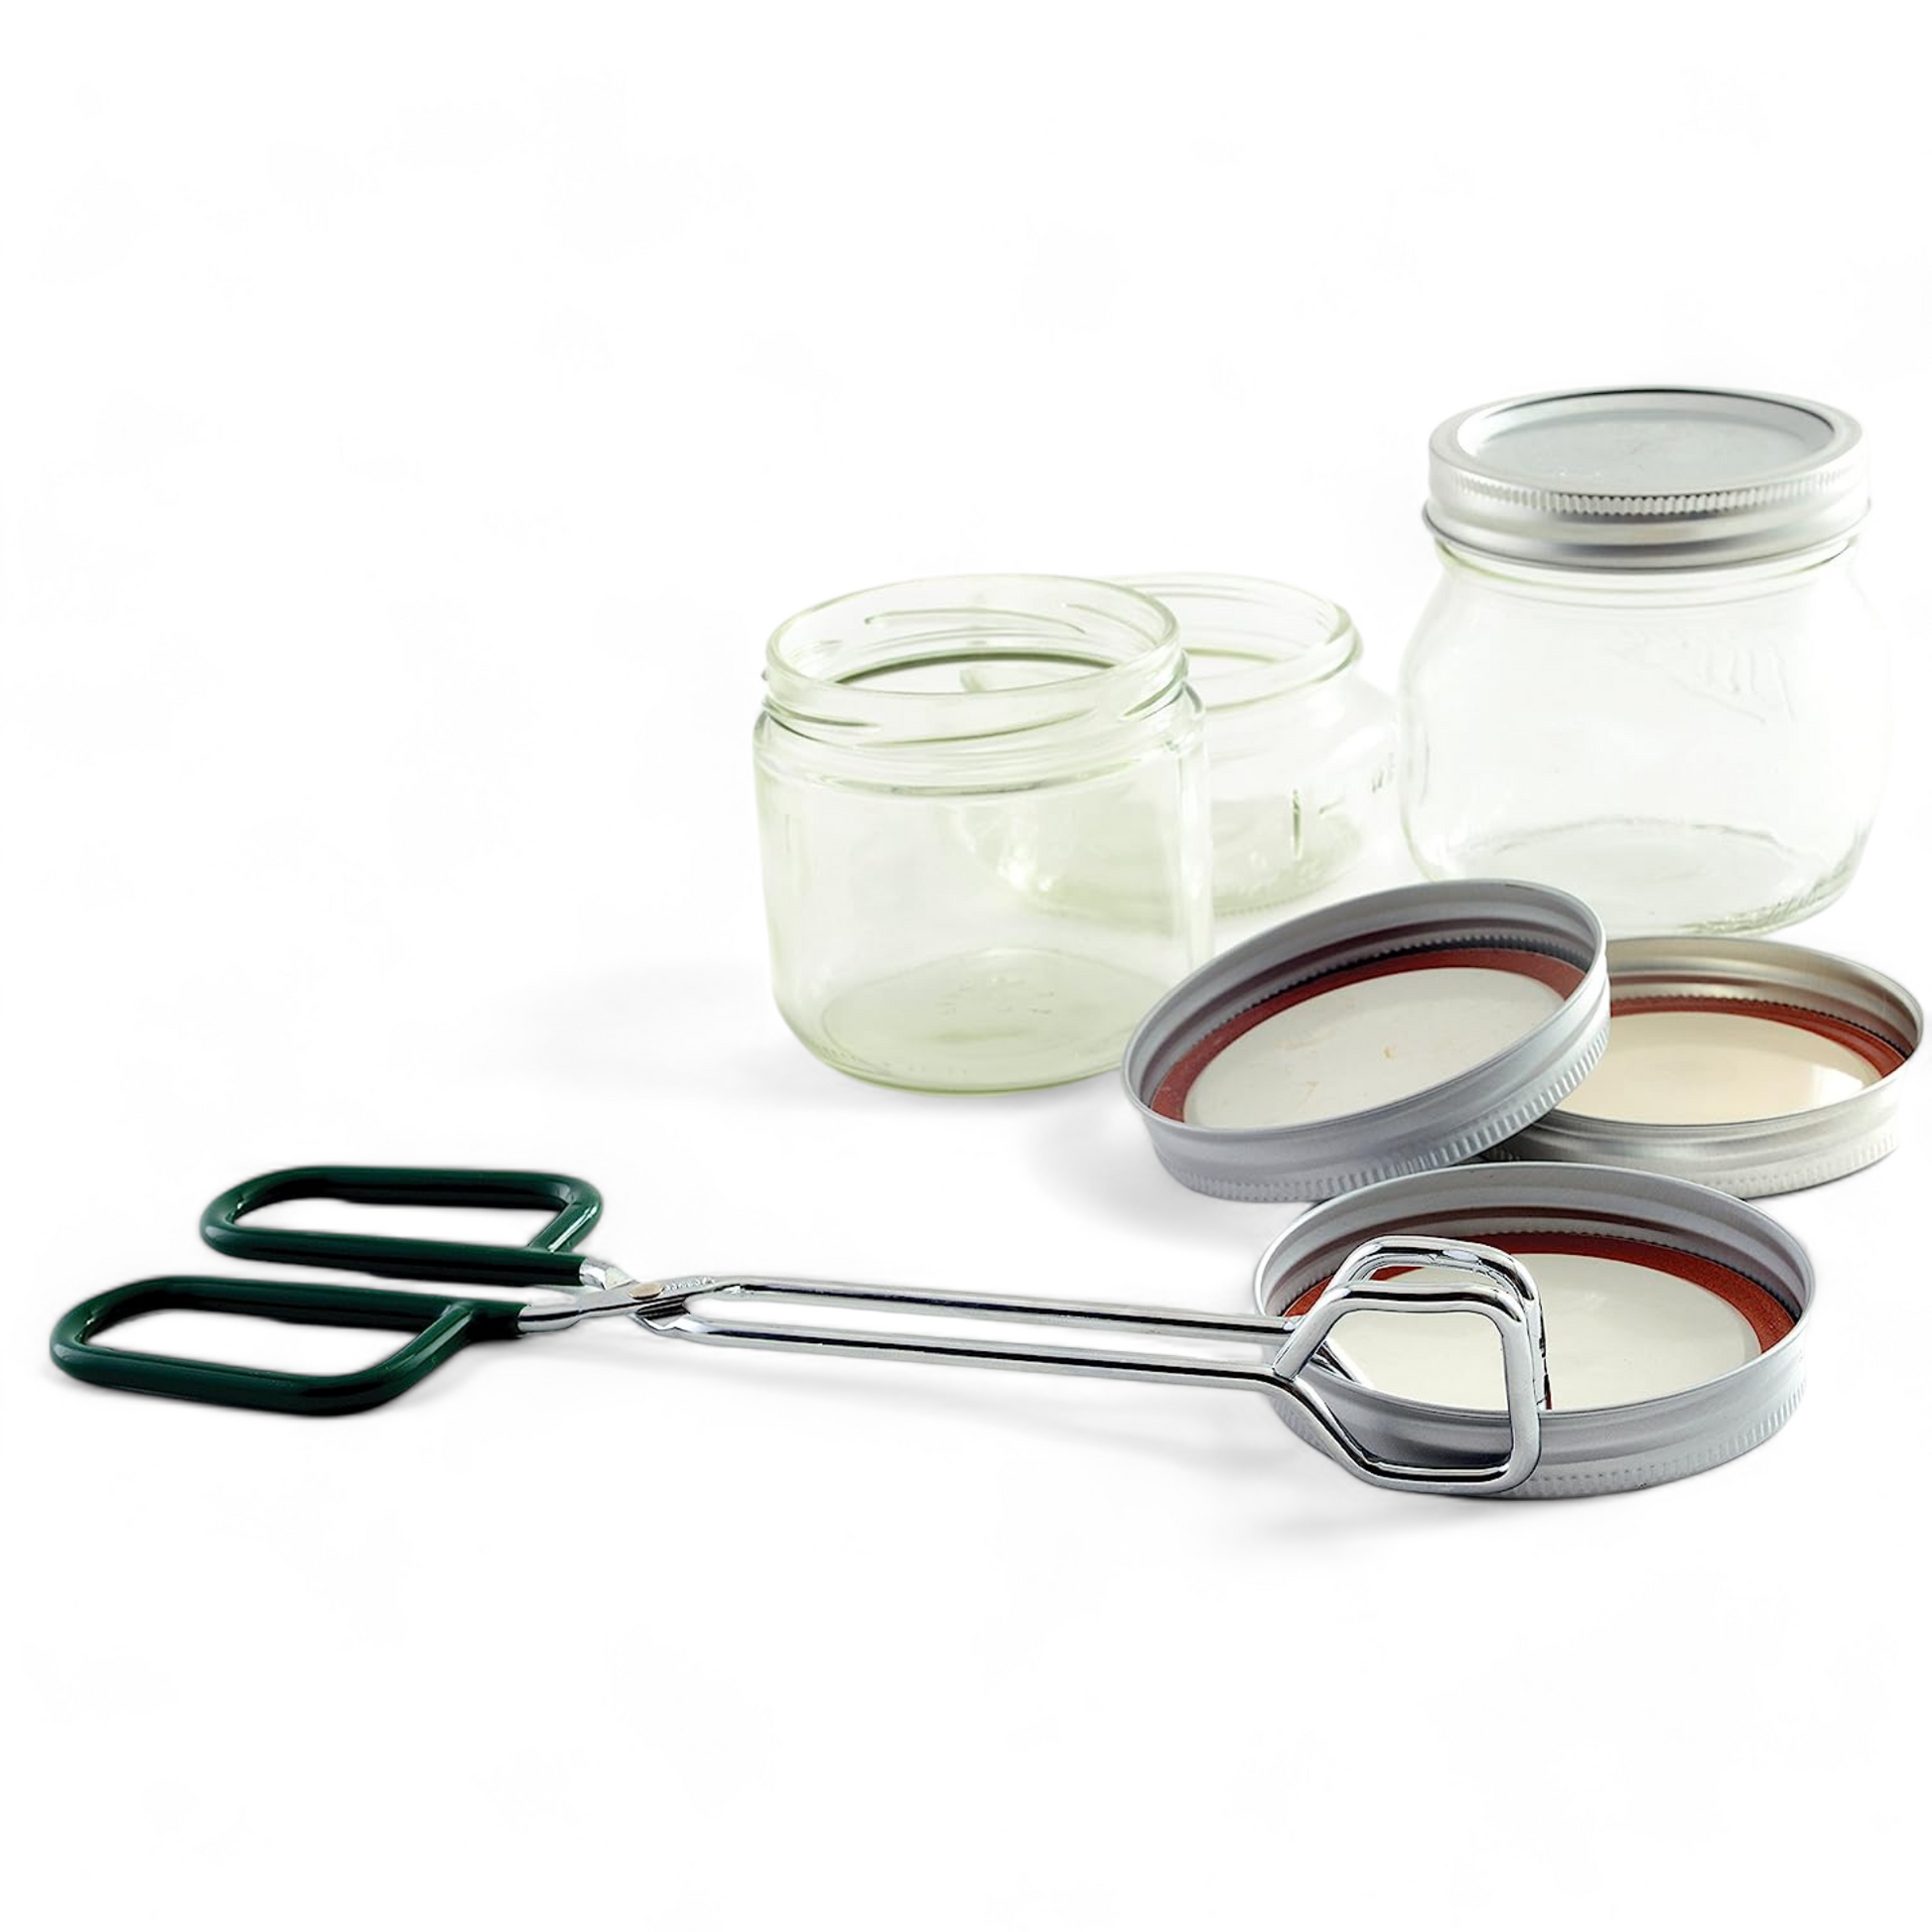 Open canning jars featuring jar tongs